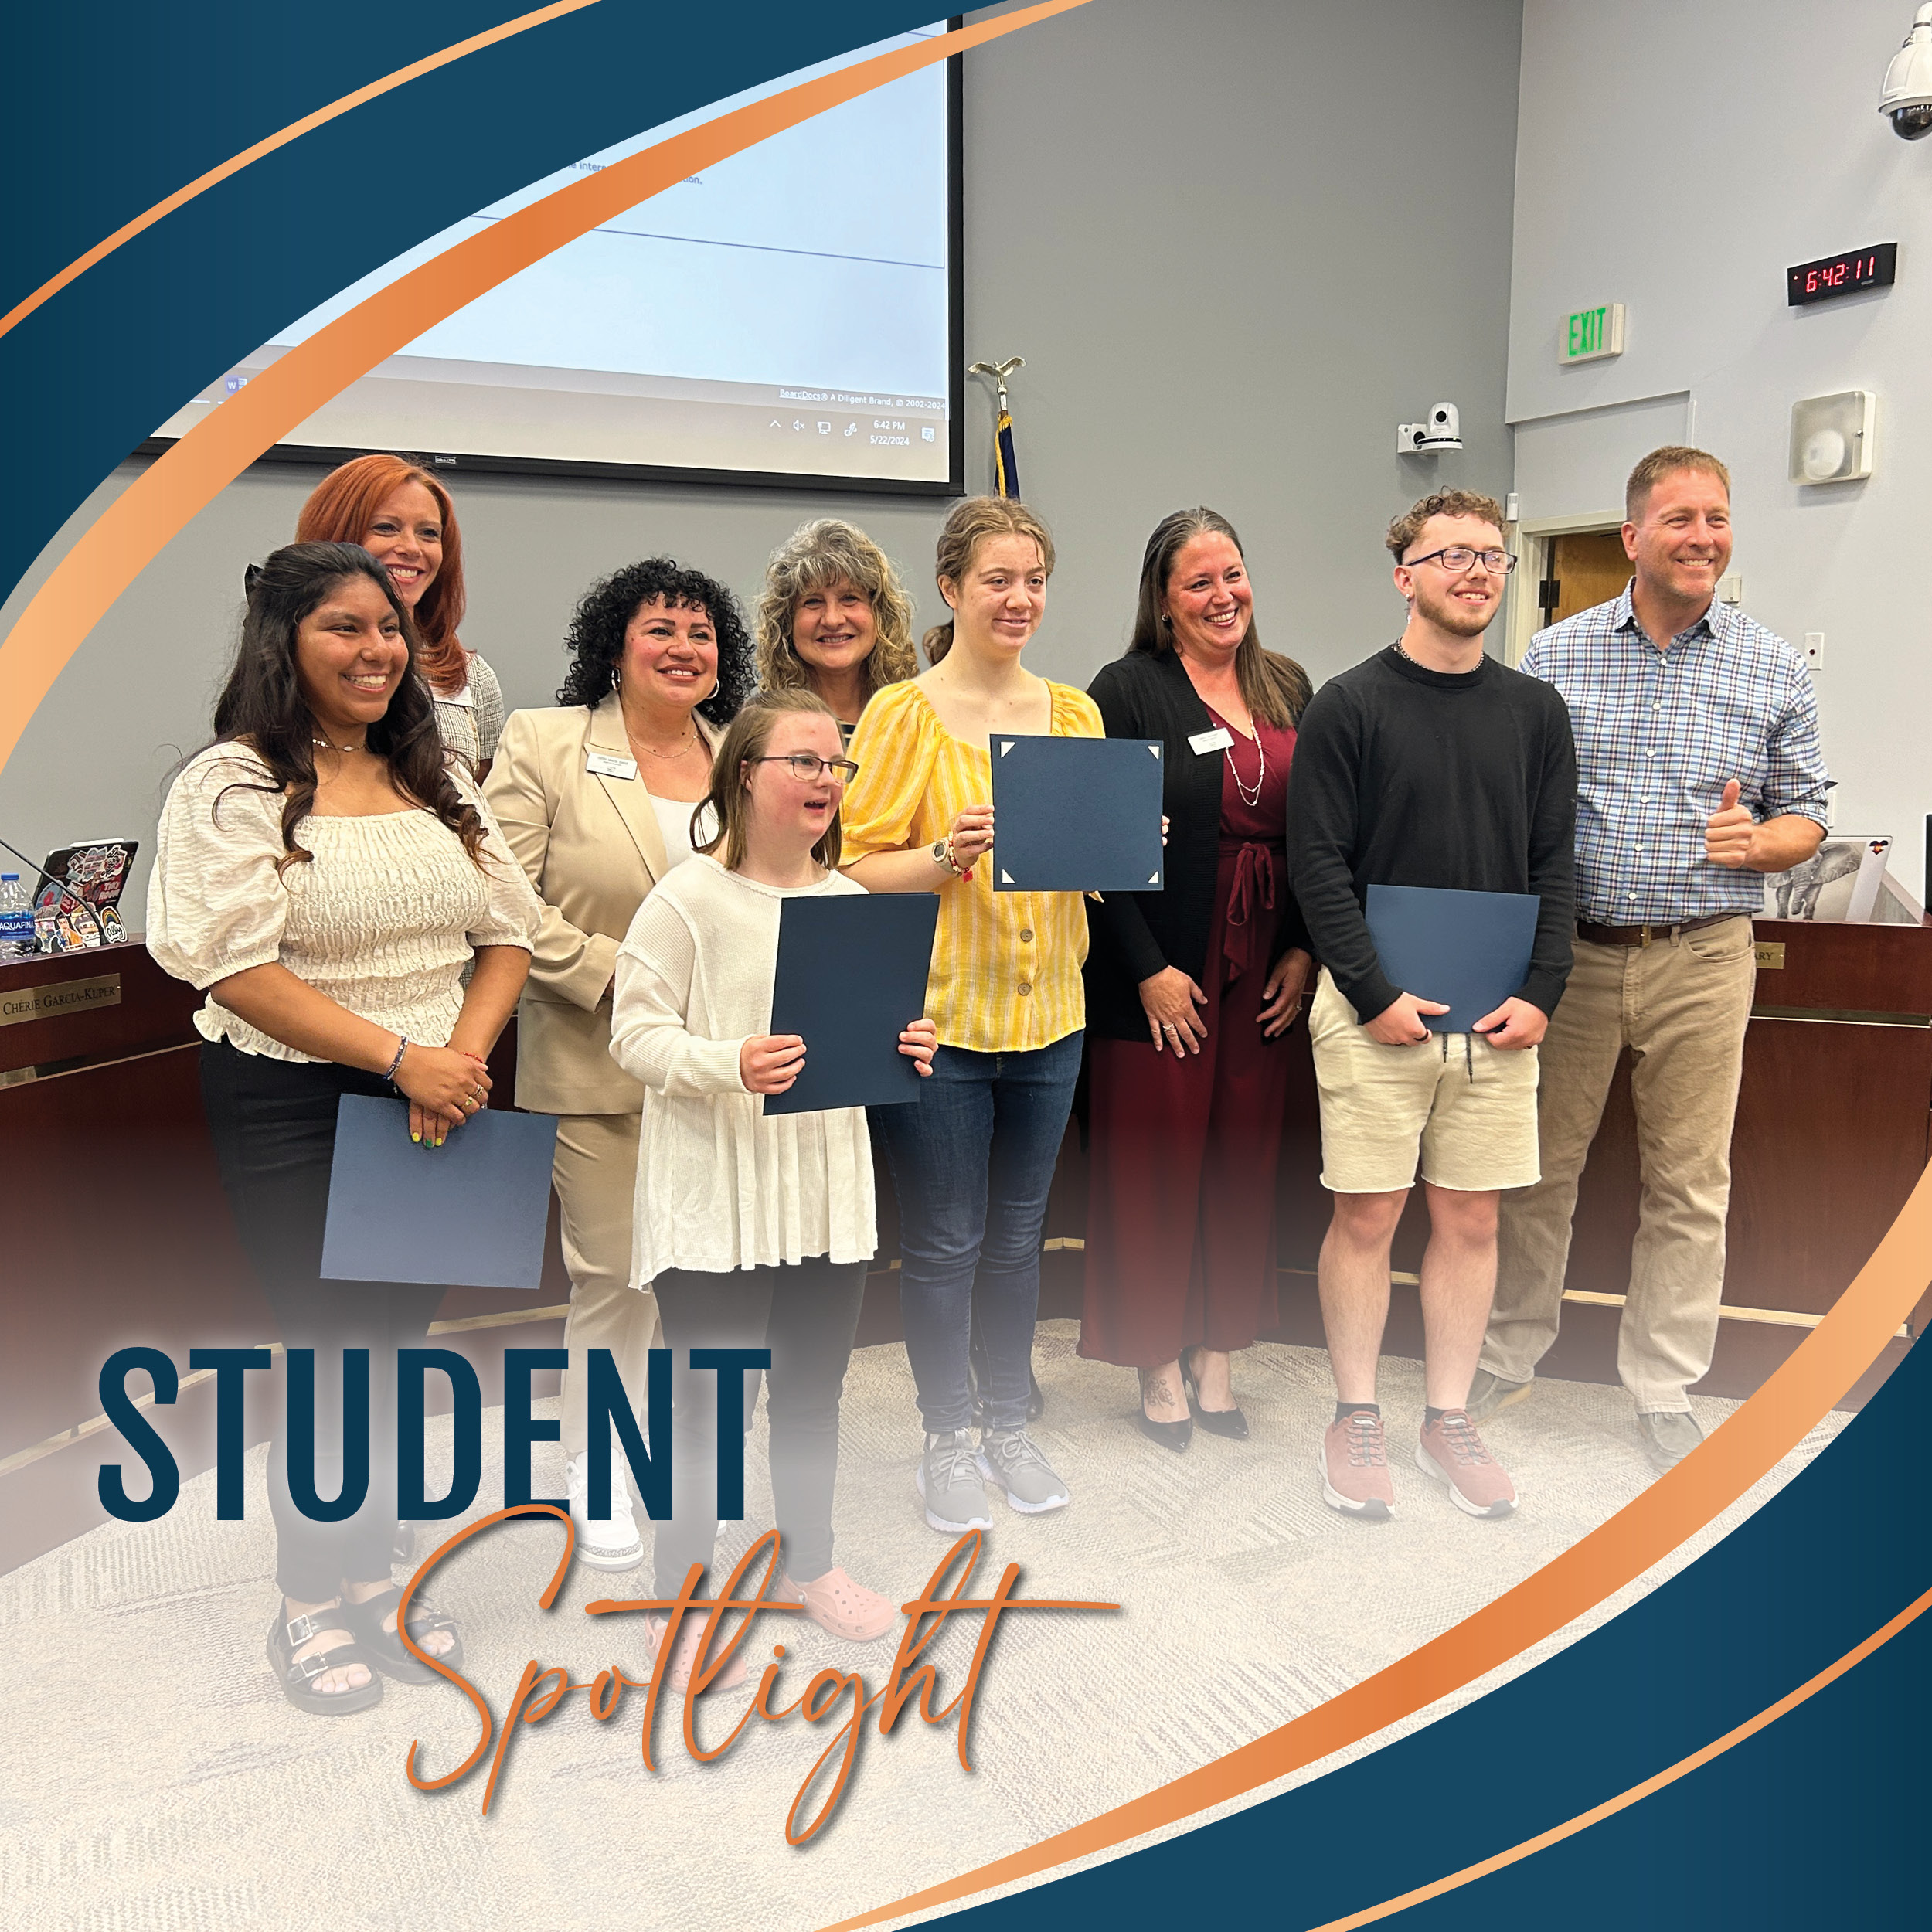 Transition Services Student Spotlight recipients holding their certificates with the Board of Education in front of the Board dais